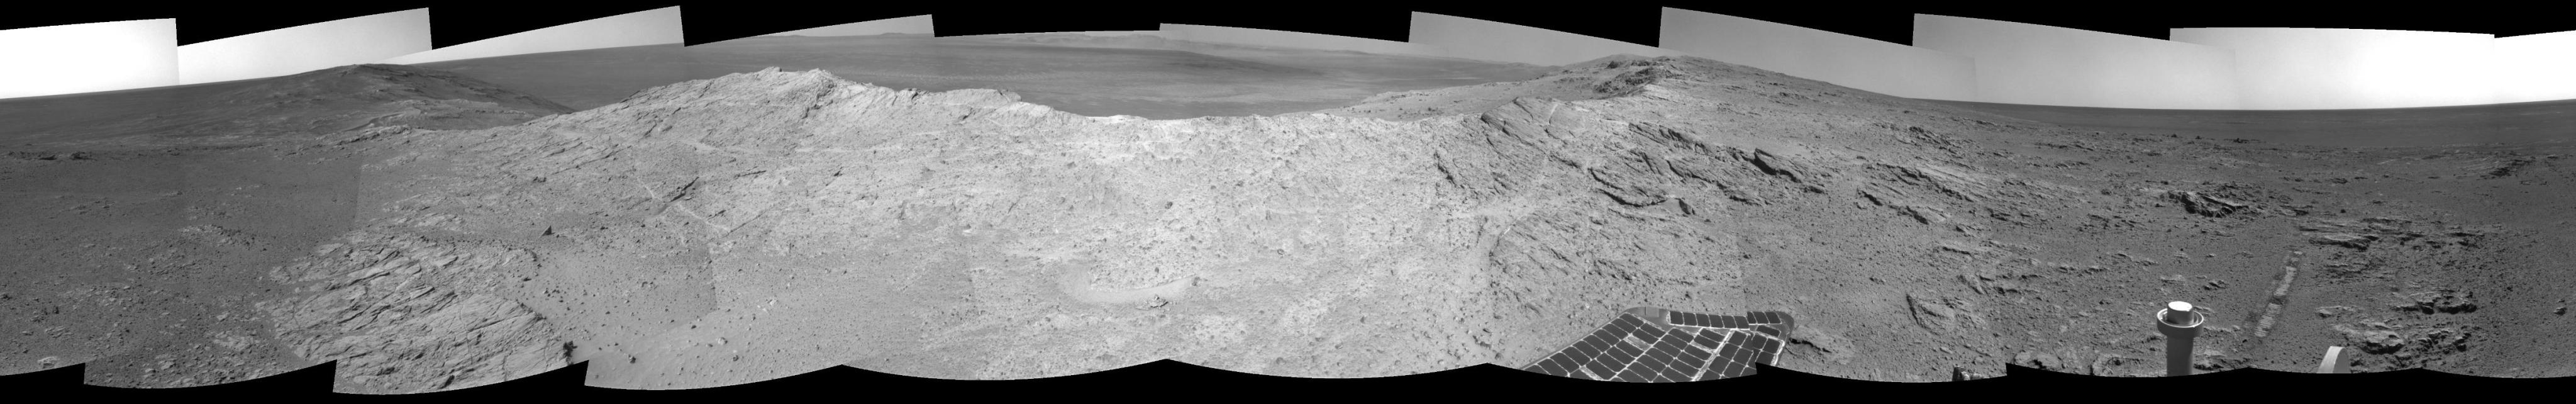 NASA's Mars Exploration Rover Opportunity used its navigation camera on May 10, 2014, to capture this 360-degree view near the ridgeline of Endeavour Crater's western rim. The center is southeastward. Rocks on the slope to the right of center are in an outcrop area targeted for the rover to study.